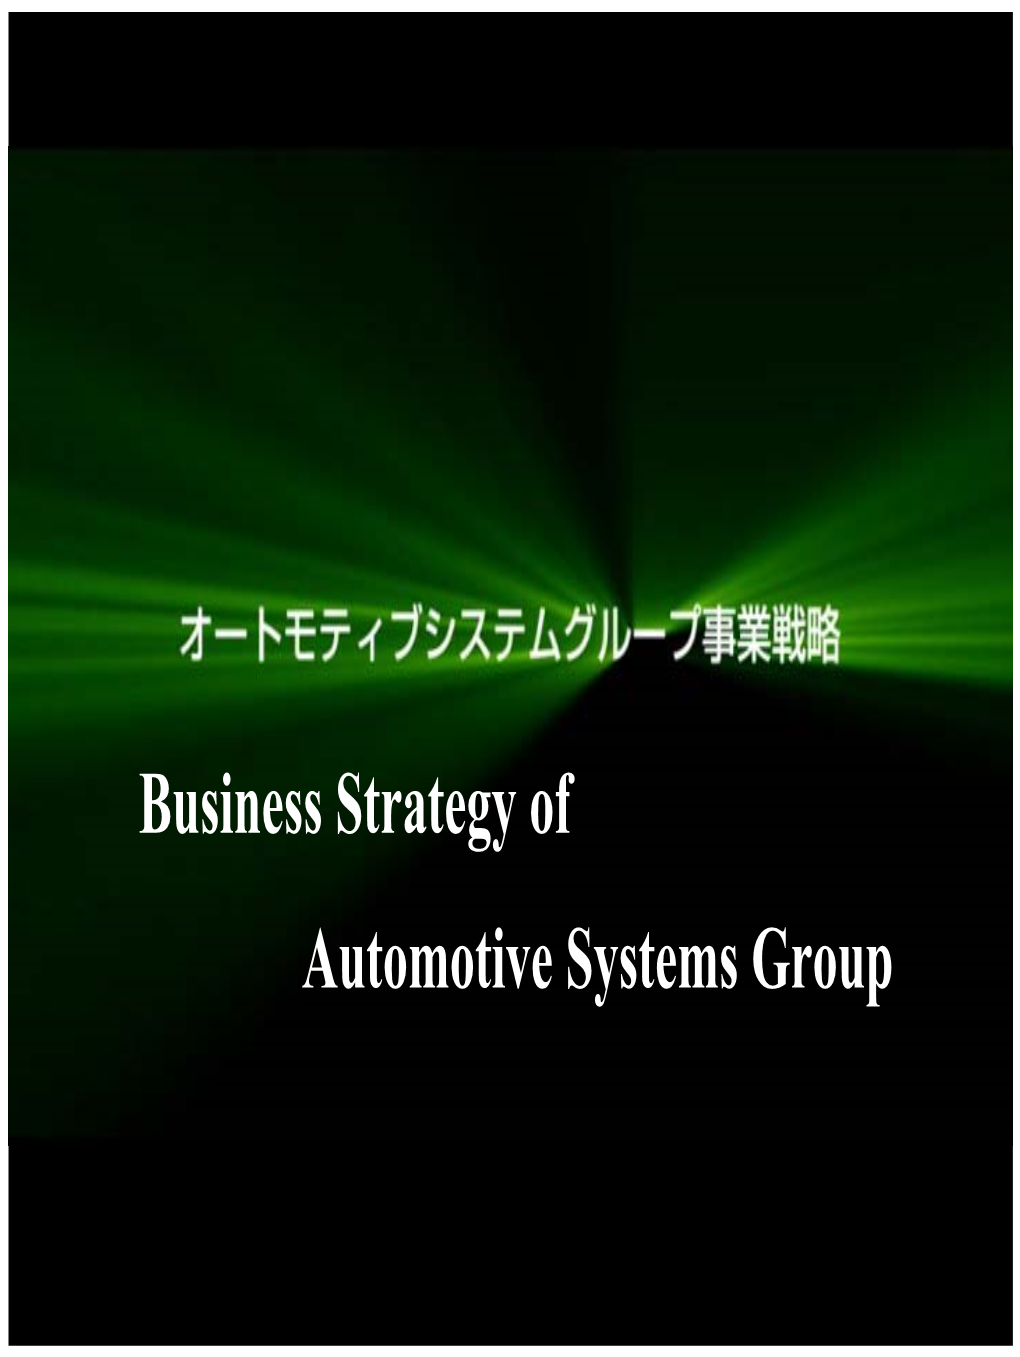 Hitachi Group Automobile-Related Business Strategy Meeting